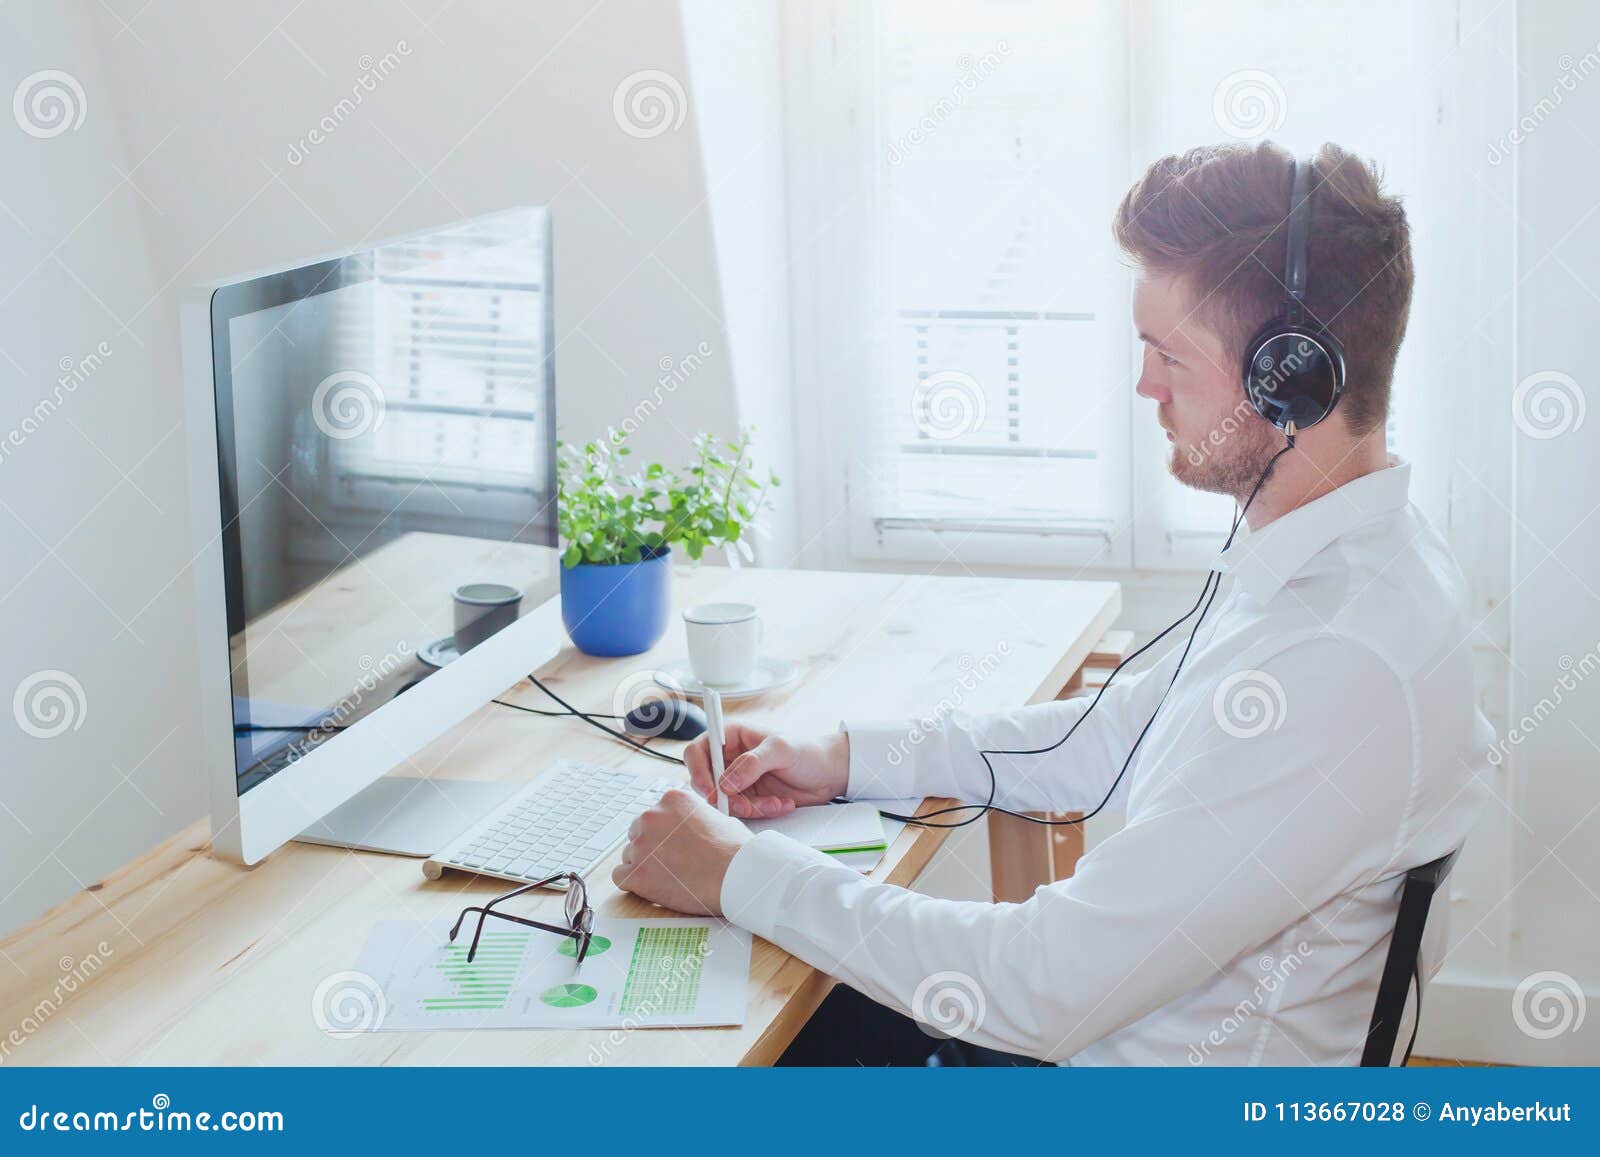 online conference or webinar, business man working in the office, education on internet